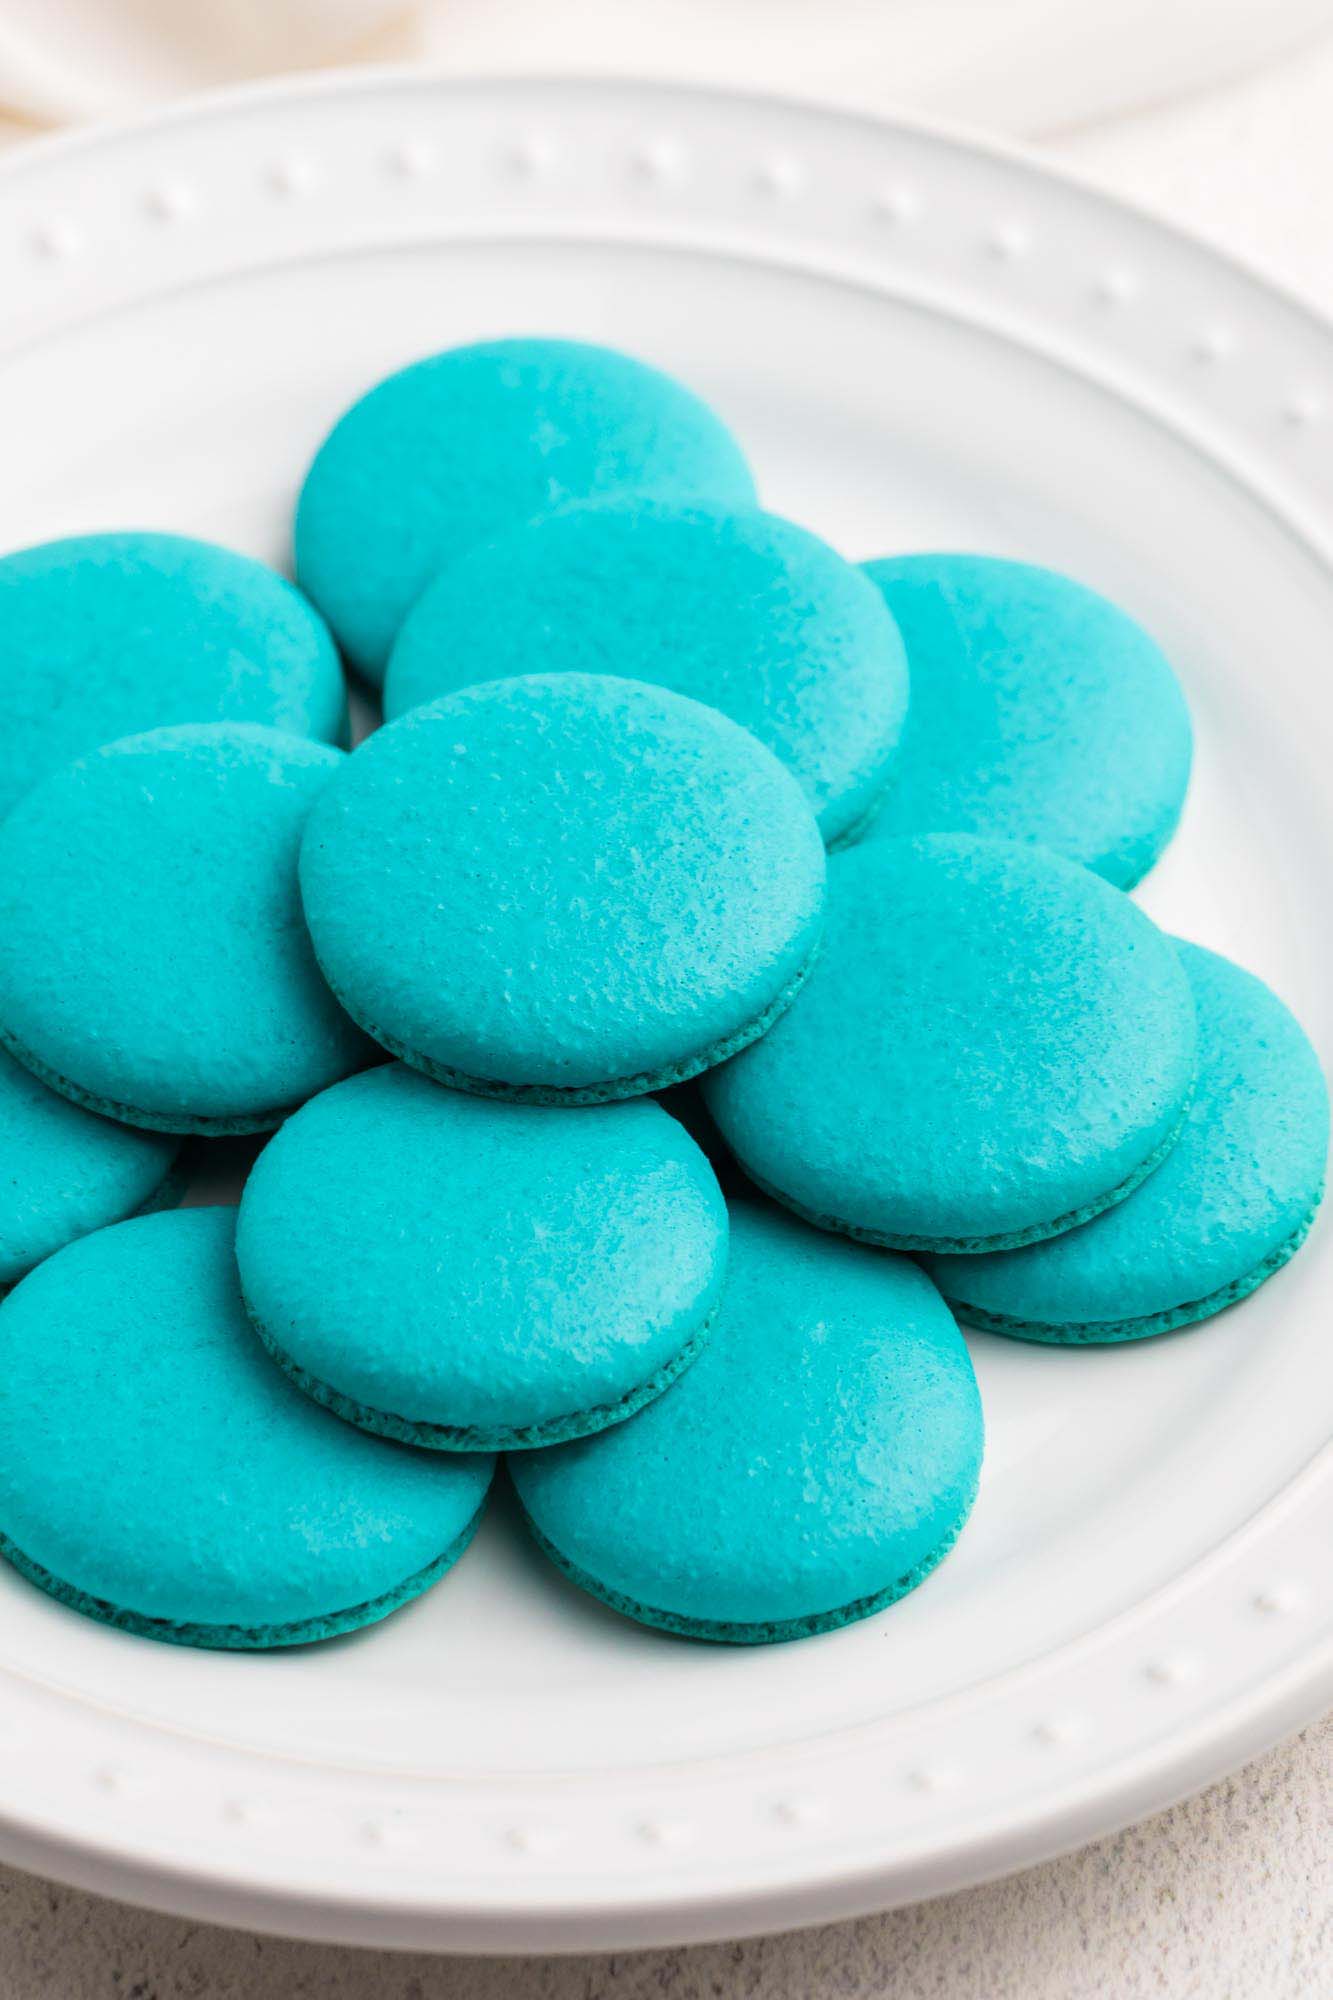 Teal blue baby yoda macaron sheels on a white plate without filling